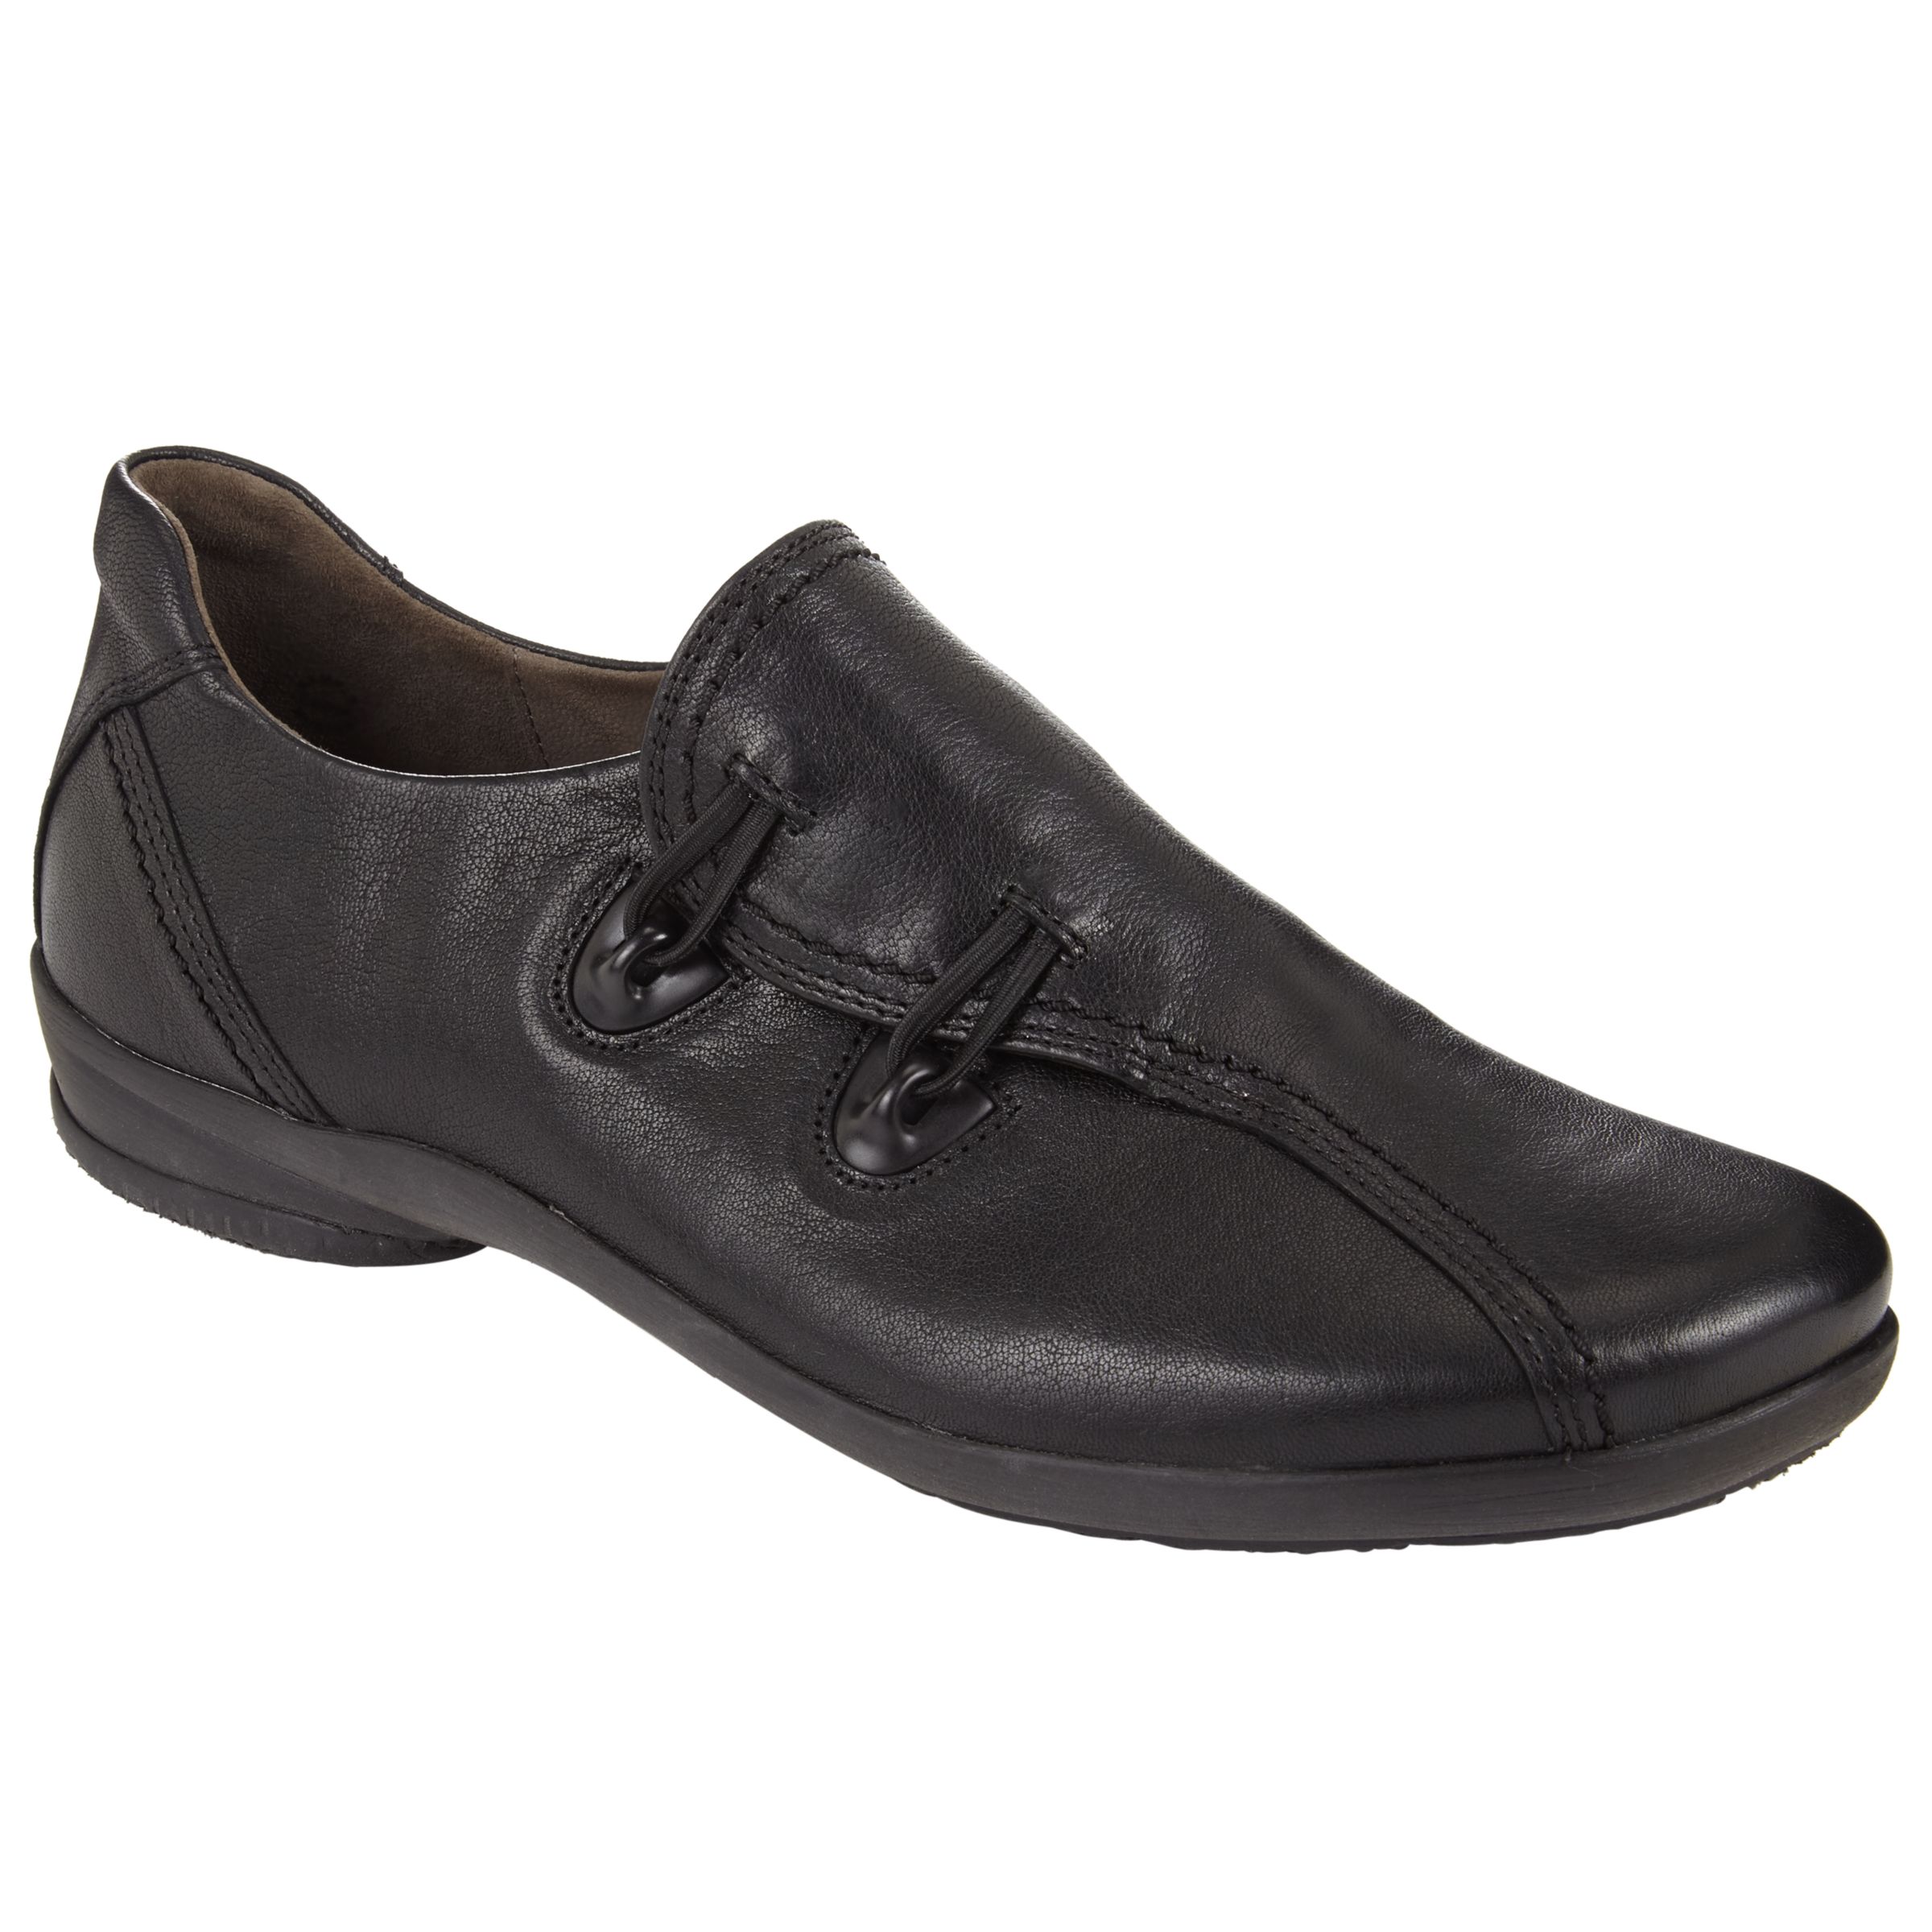 Buy Gabor Rush Leather Flat Shoes, Black Online at johnlewis